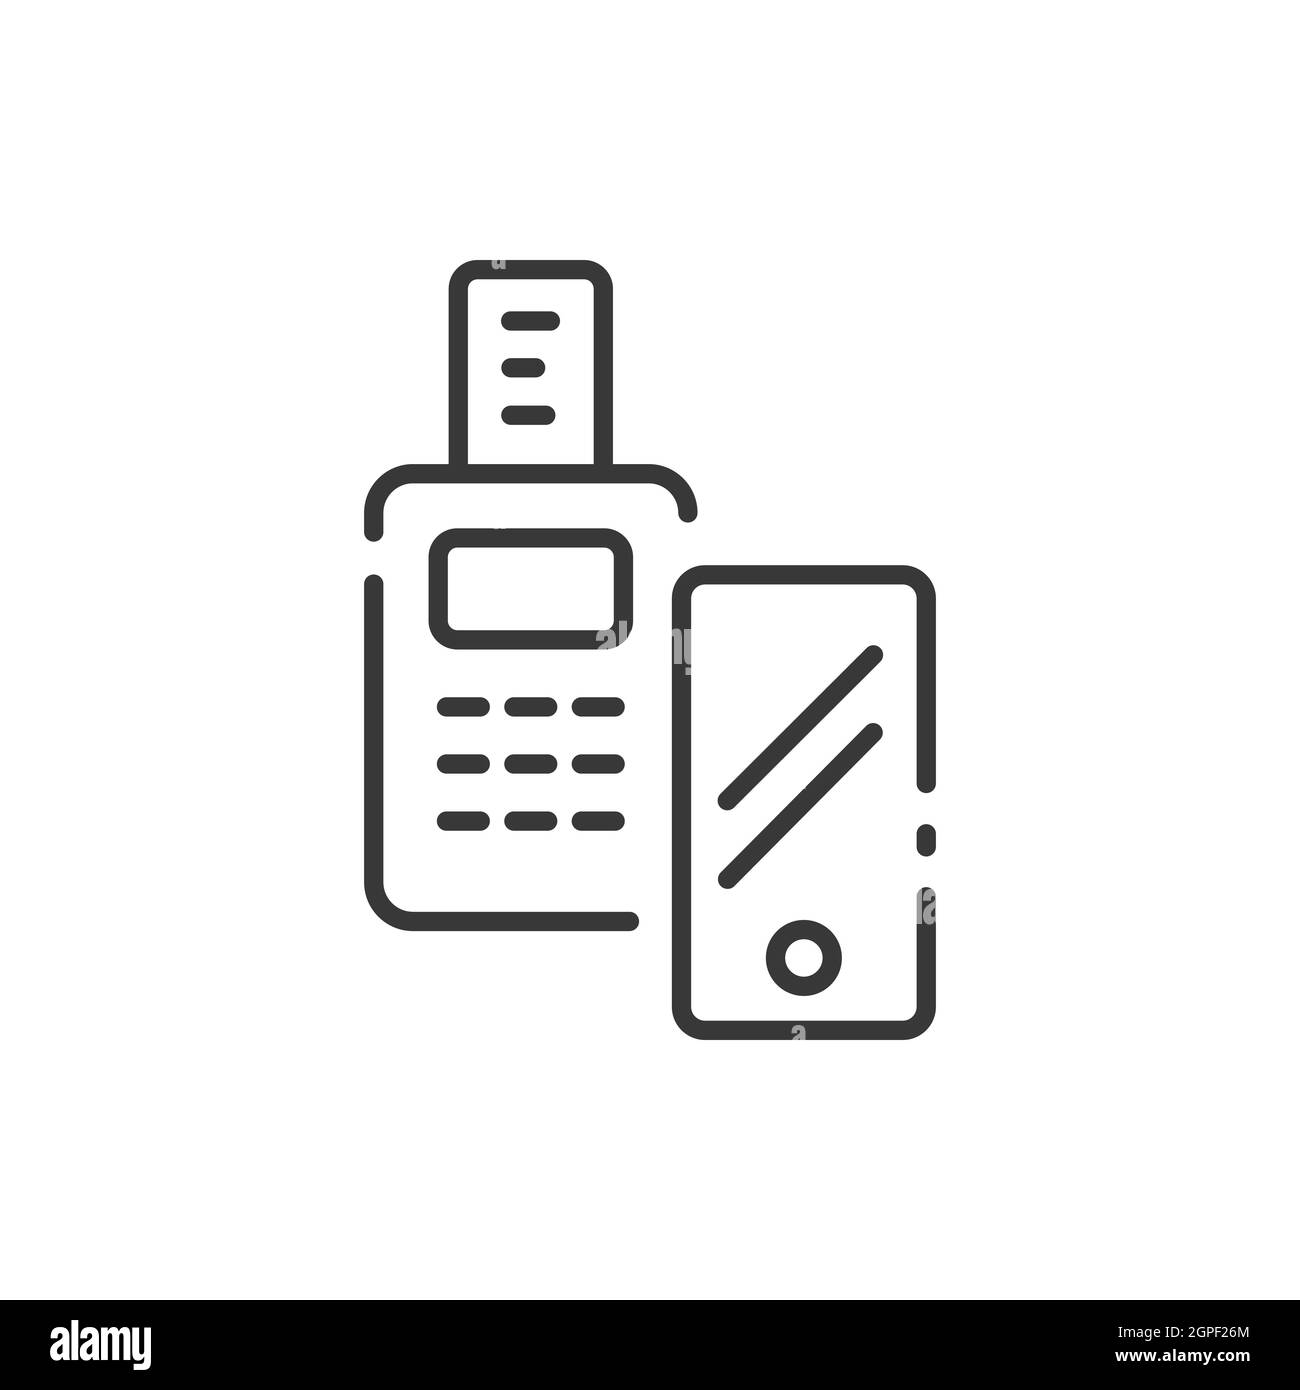 Transaction with smartphone thin line icon. Shipping terminal payment. Pay with mobile. Outline commerce vector illustration Stock Vector